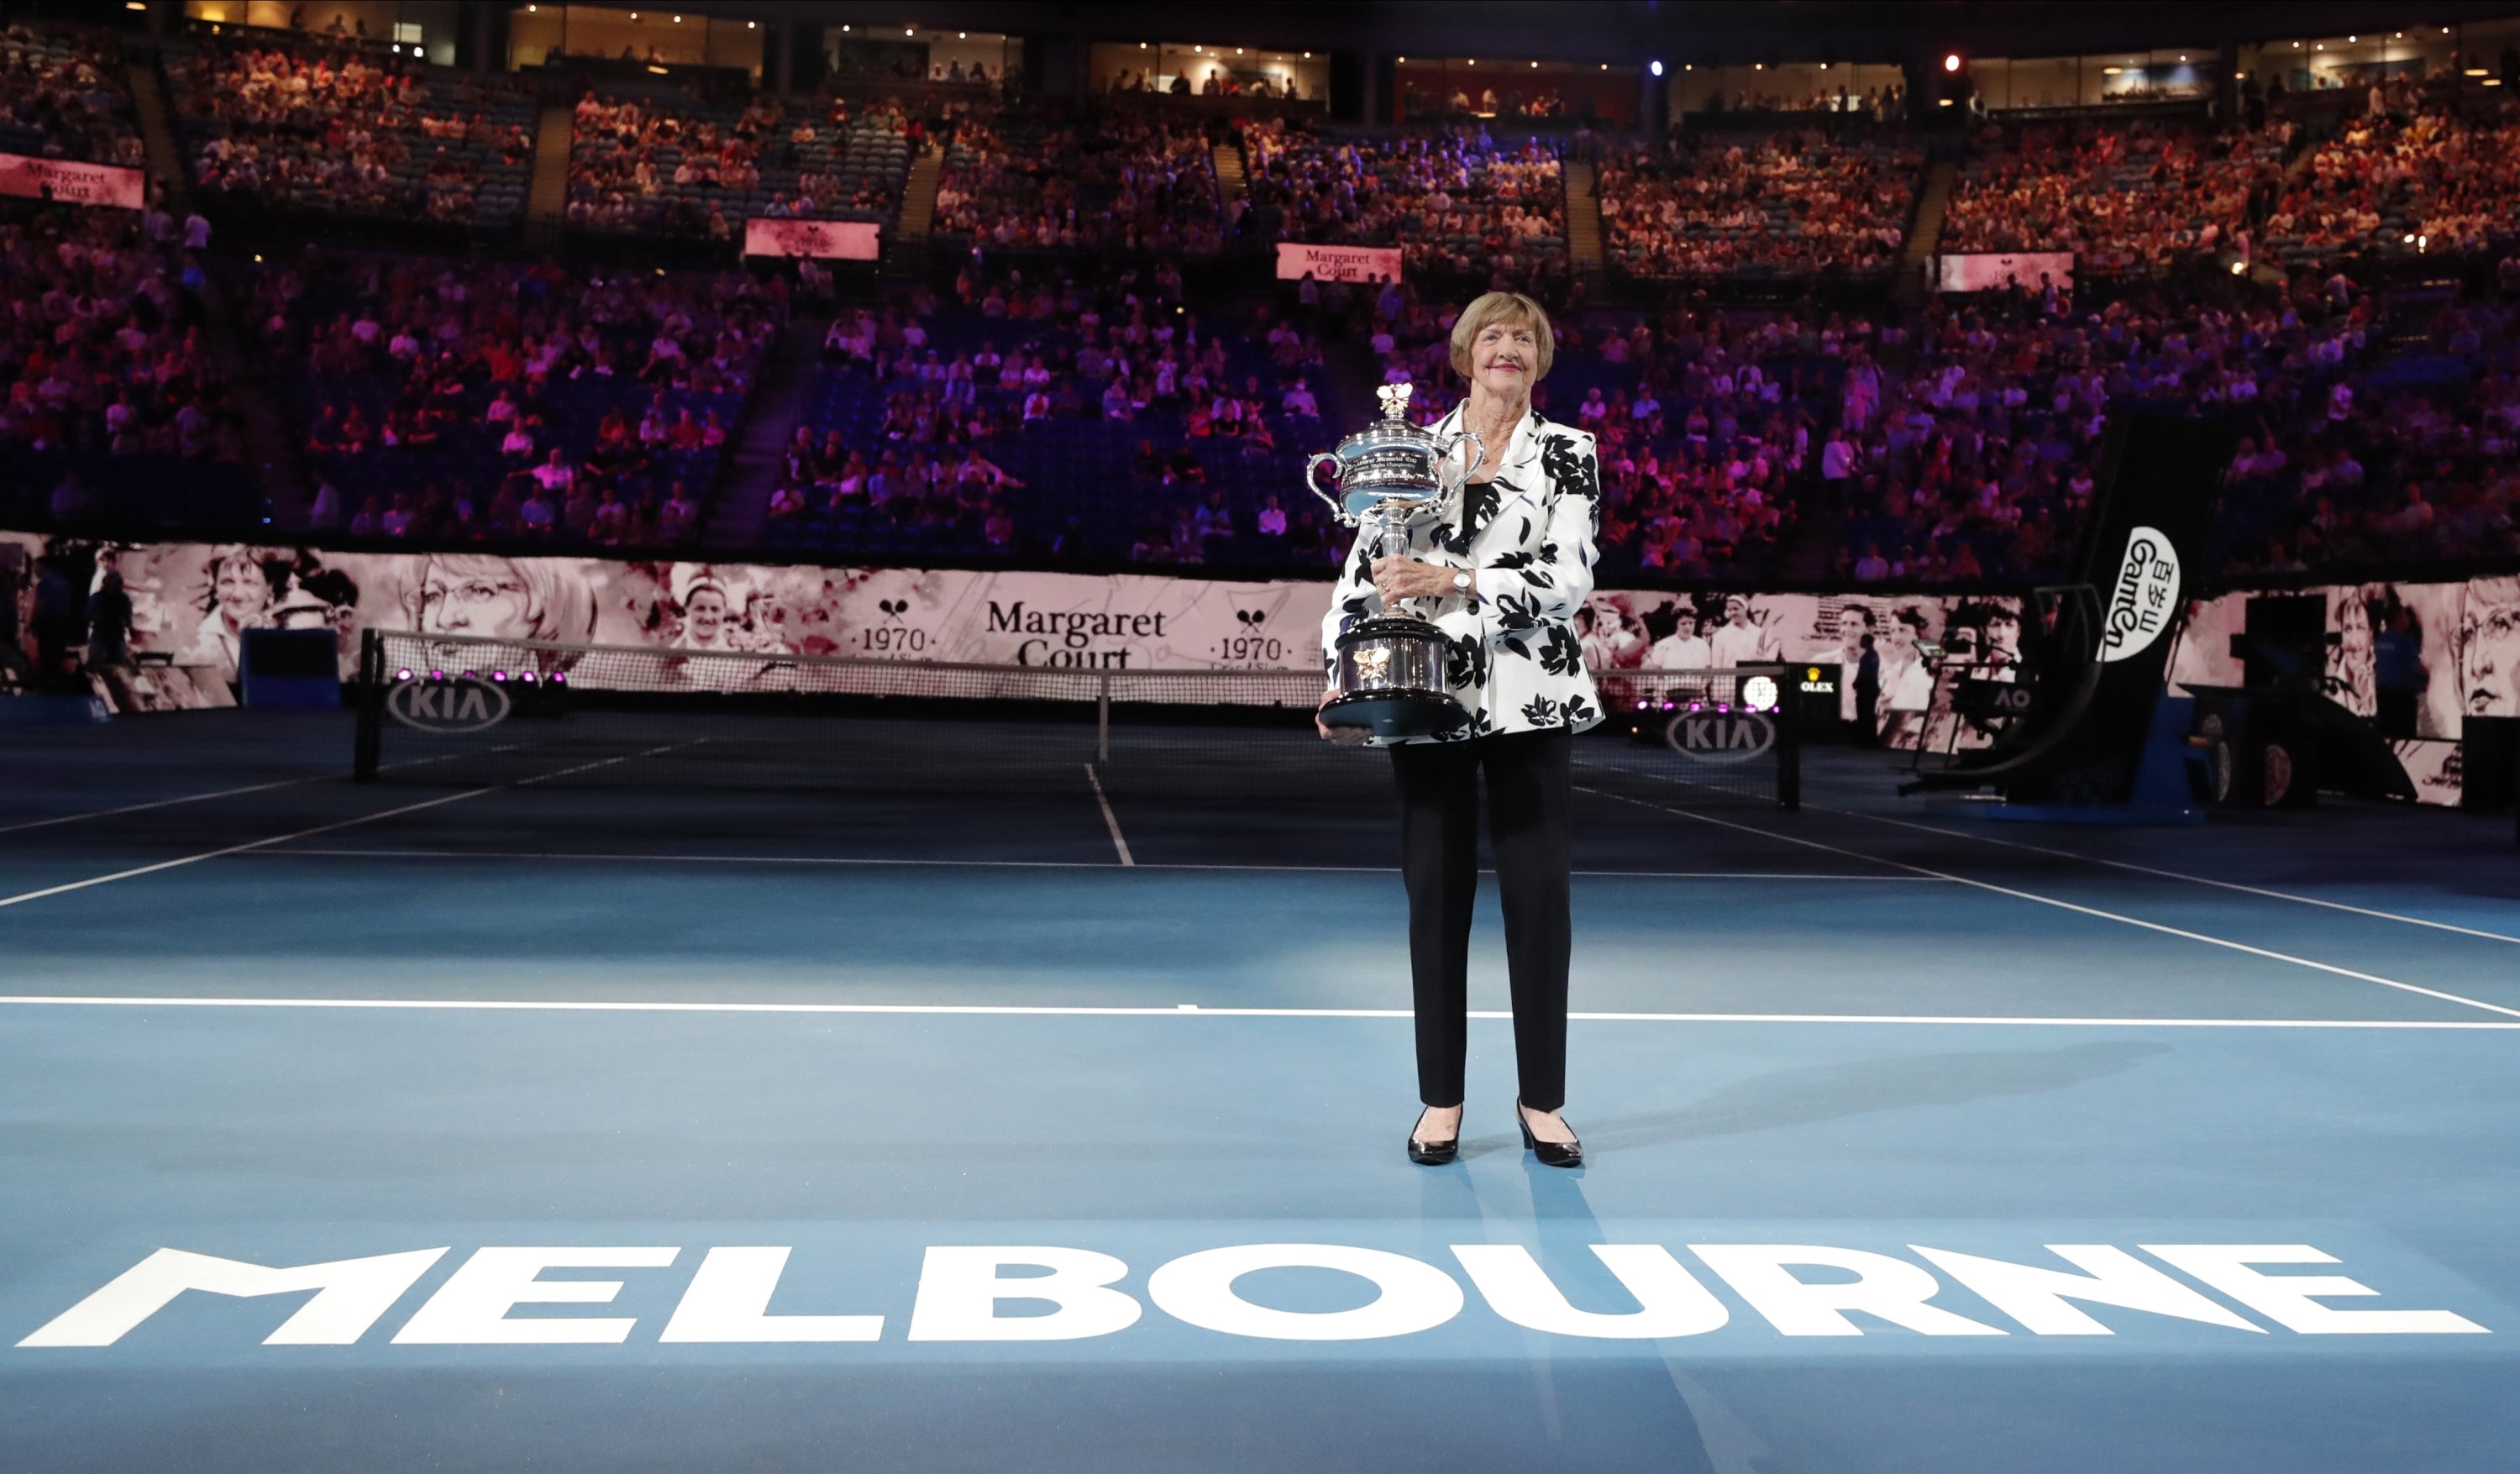 Andy Murray backs calls for removing Margaret Courts name from arena Daily Sabah image